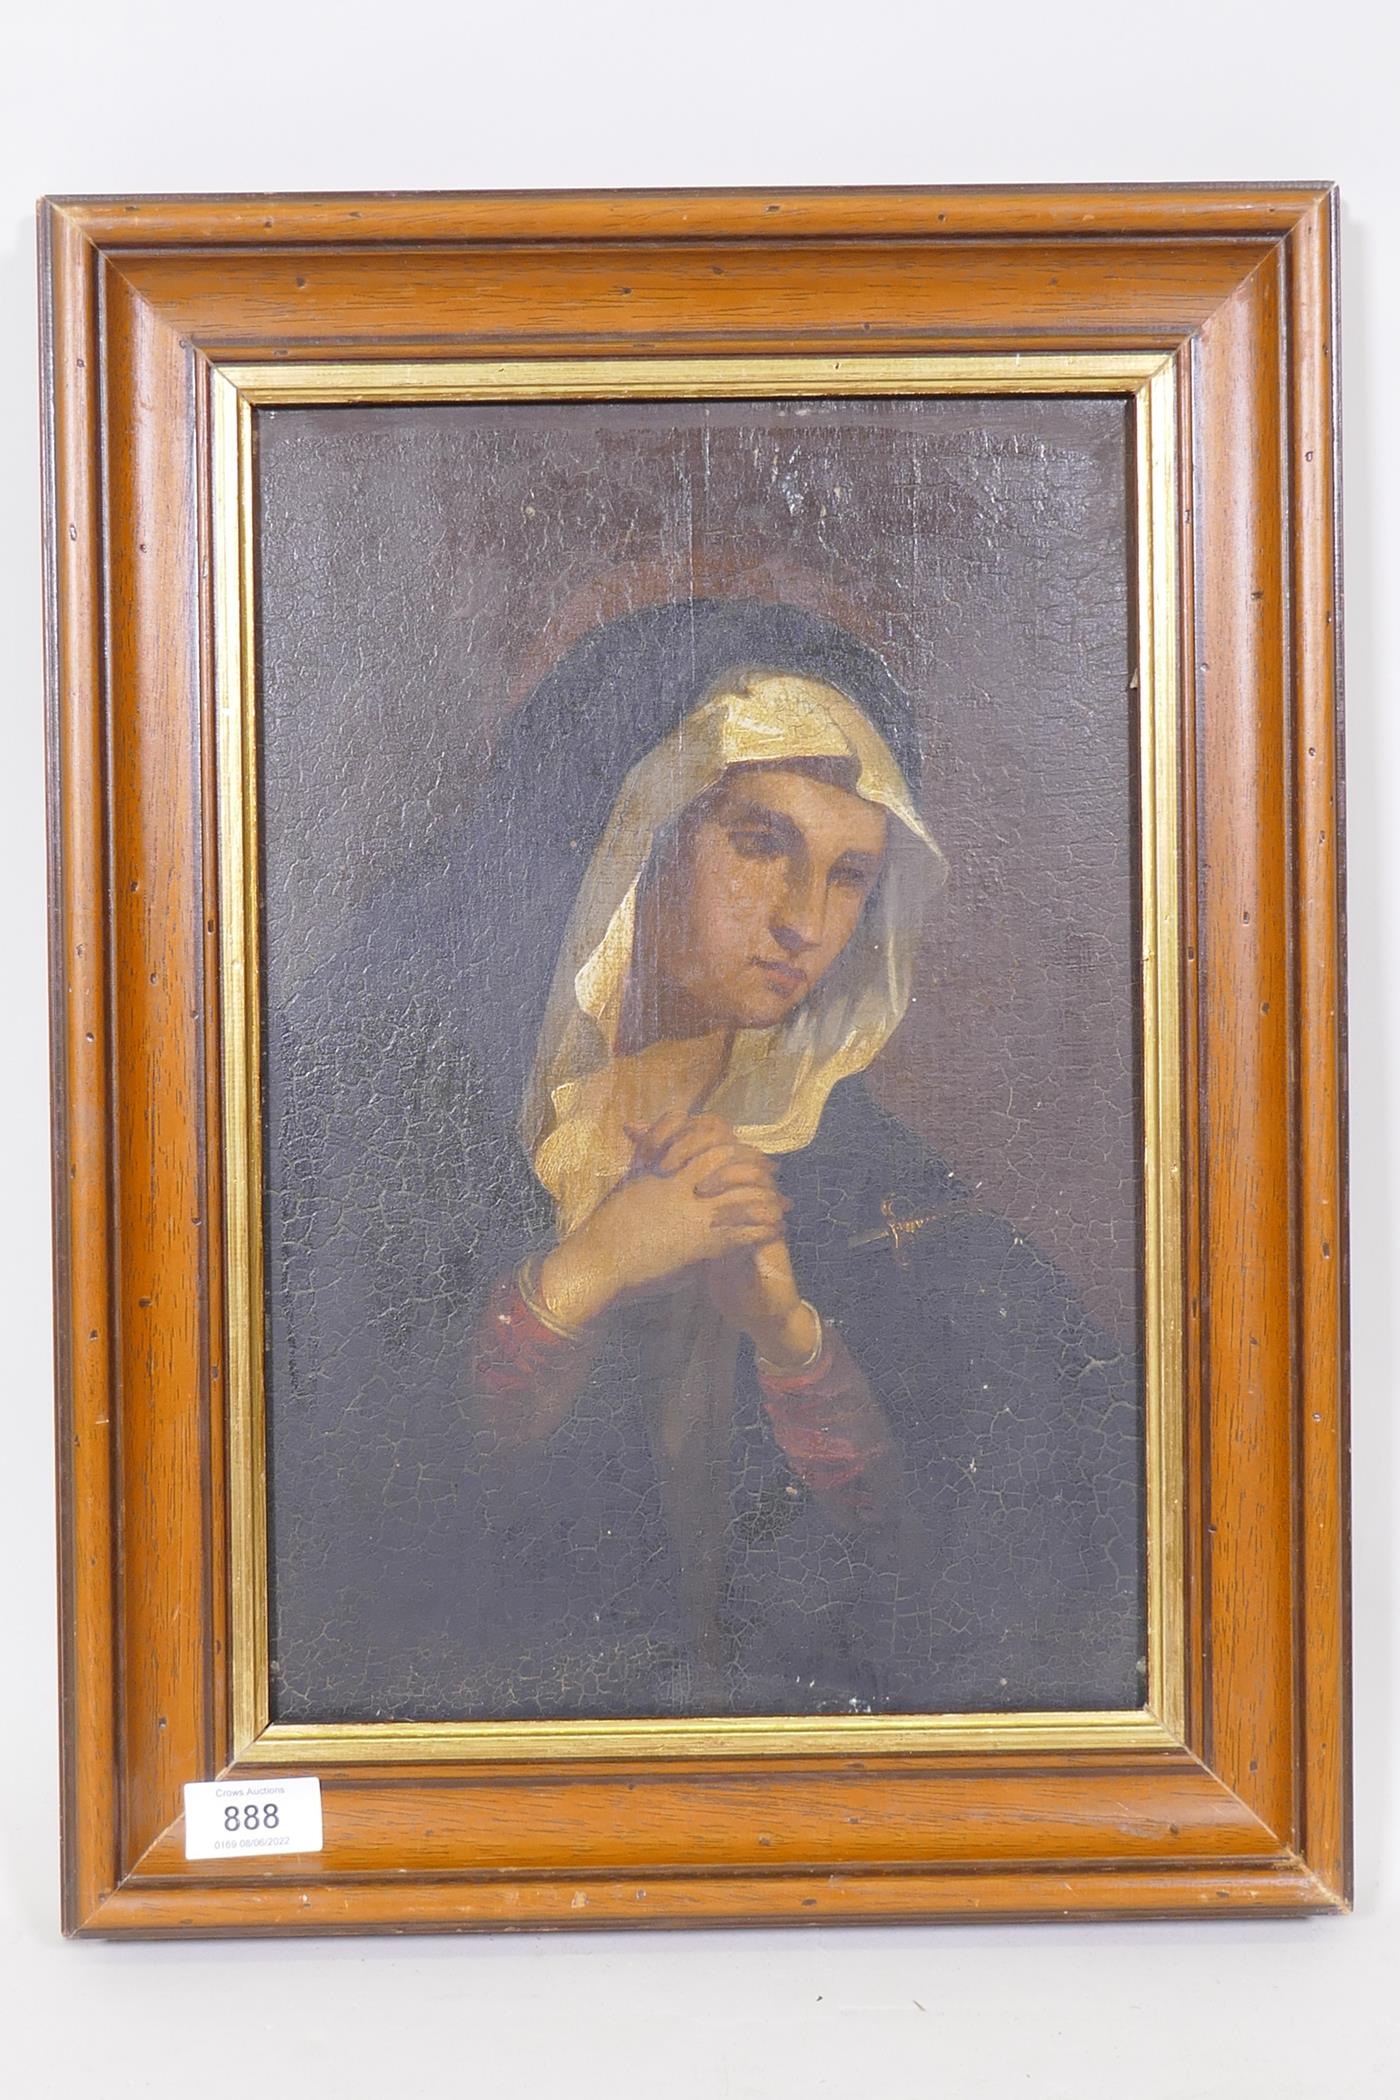 La vierge Marie poignardée, oil on panel, unsigned, late C19th/early C20th - Image 3 of 4